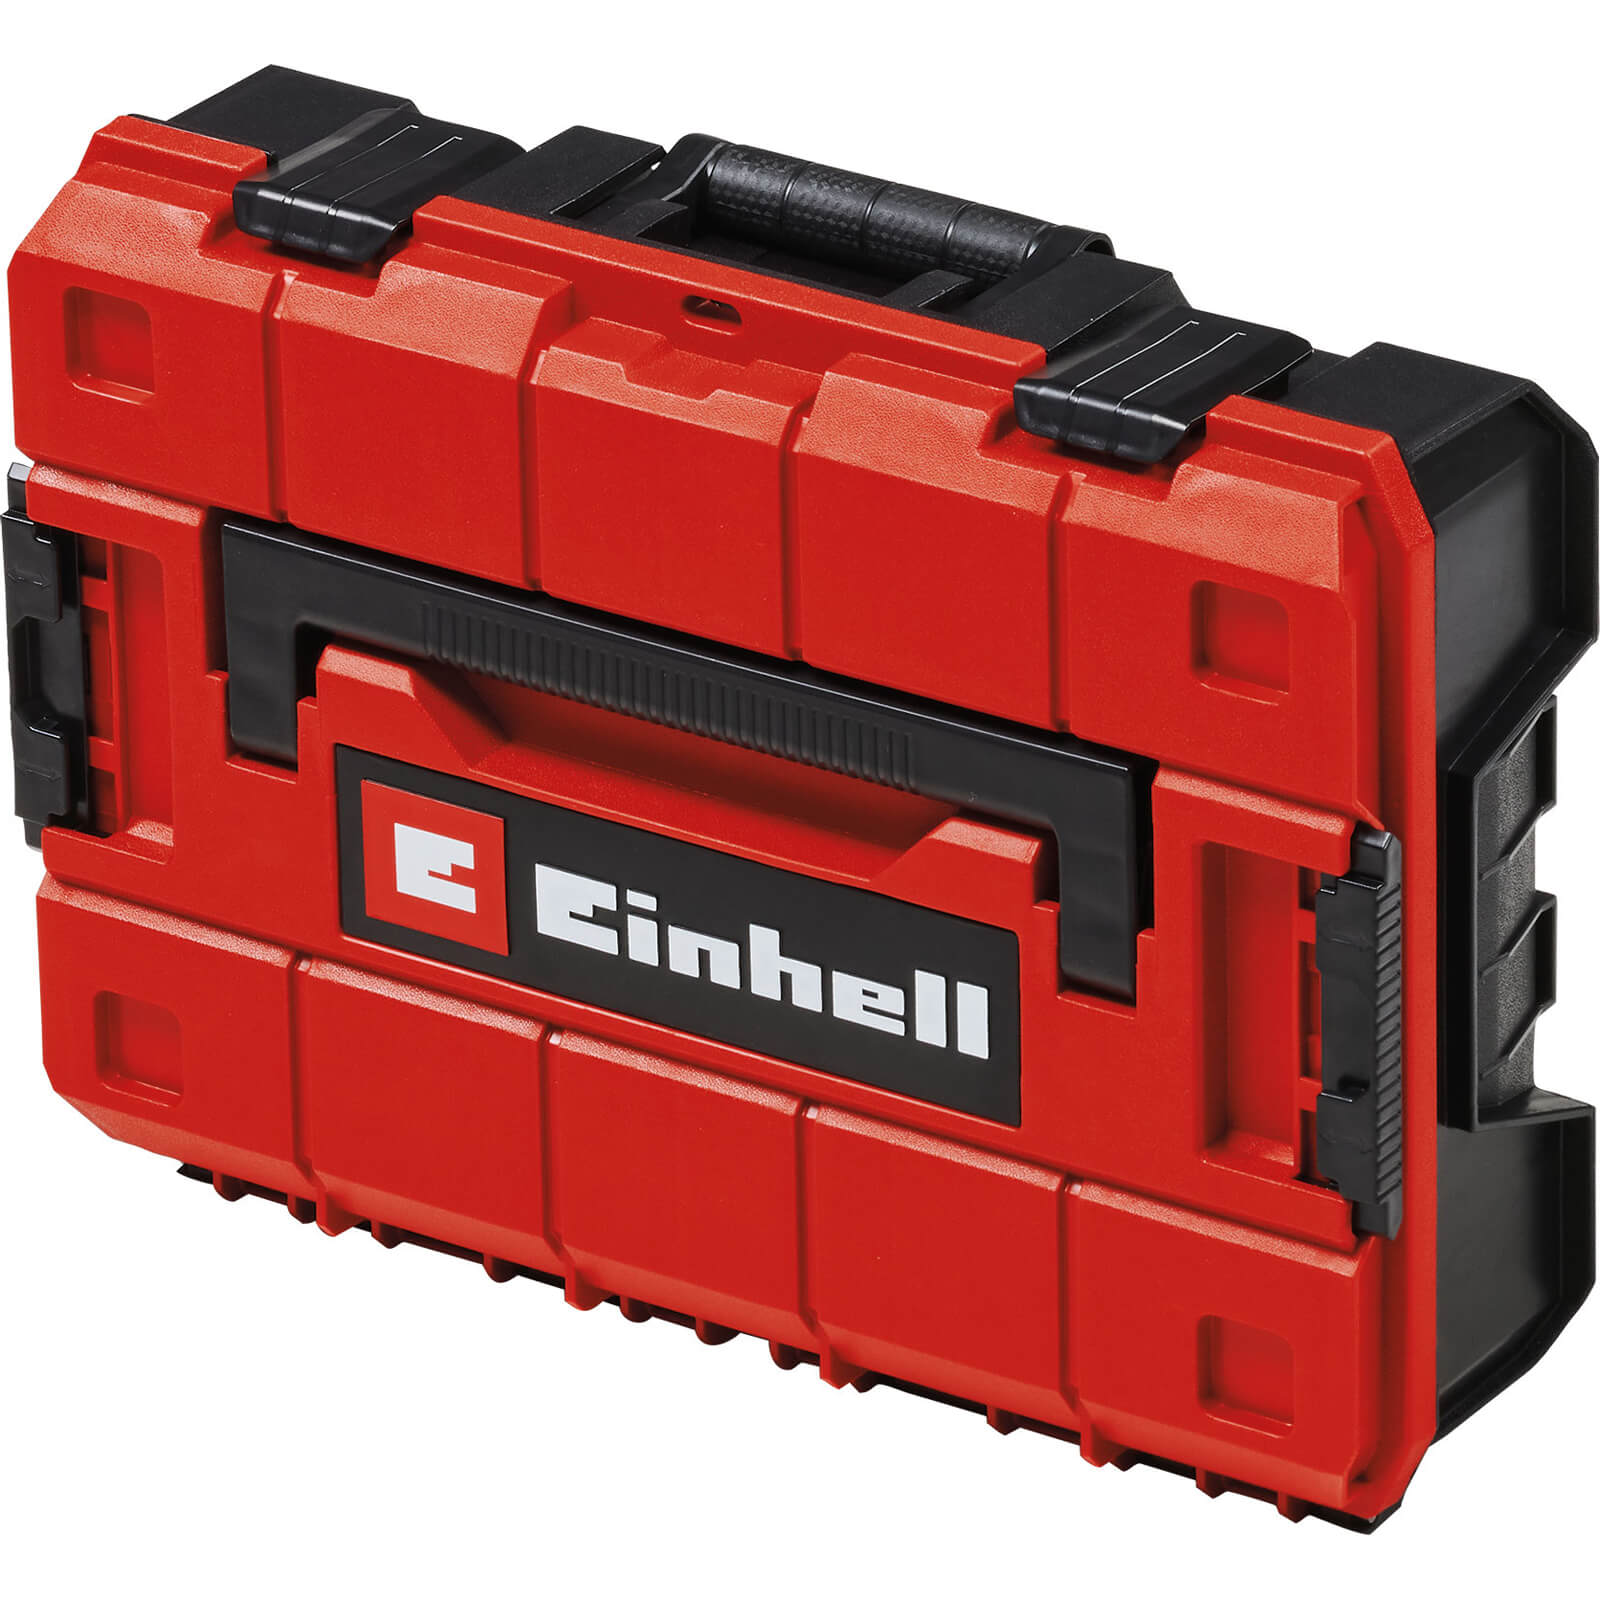 Image of Einhell E-Case Stackable Power Tool Case with Foam Inserts